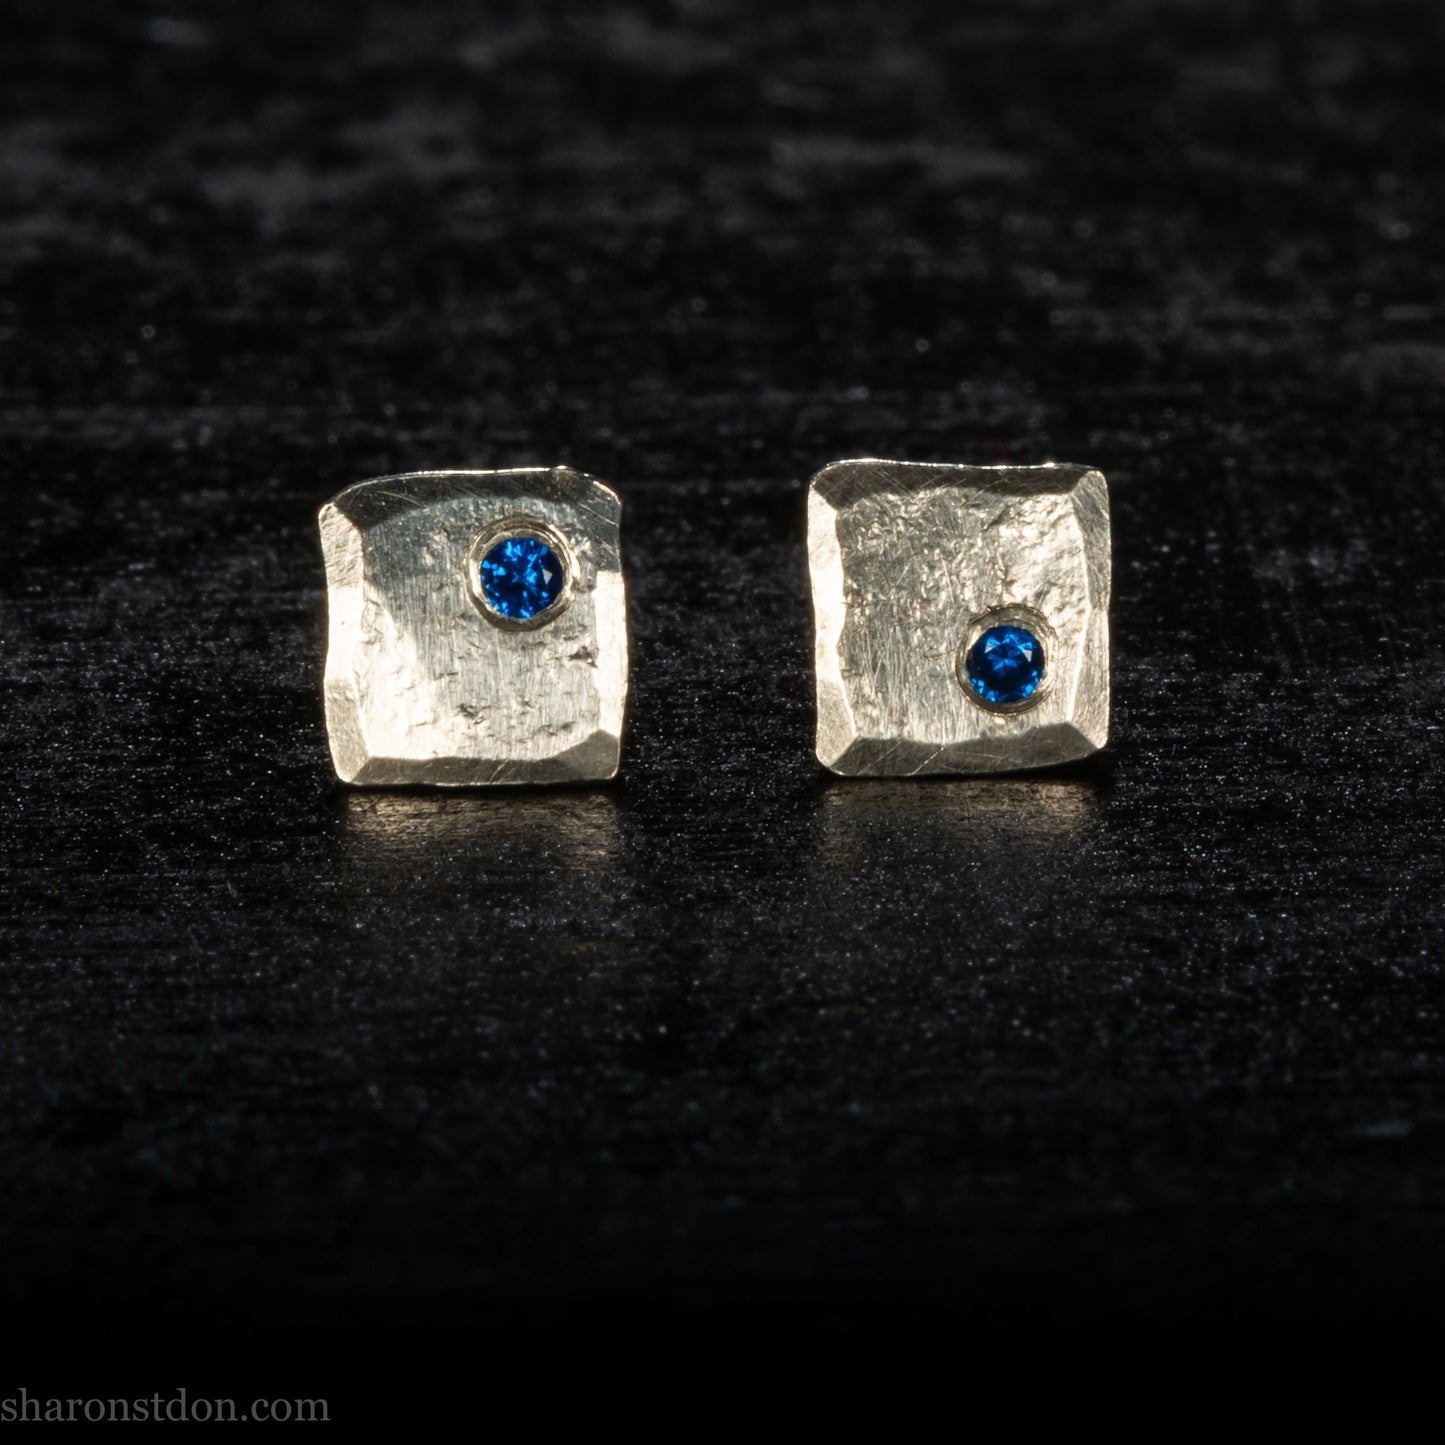 Handmade 925 sterling silver stud earrings  for men with blue spinel gemstones. Daily wear small 7mm square stud earrings made by Sharon SaintDon in North America.